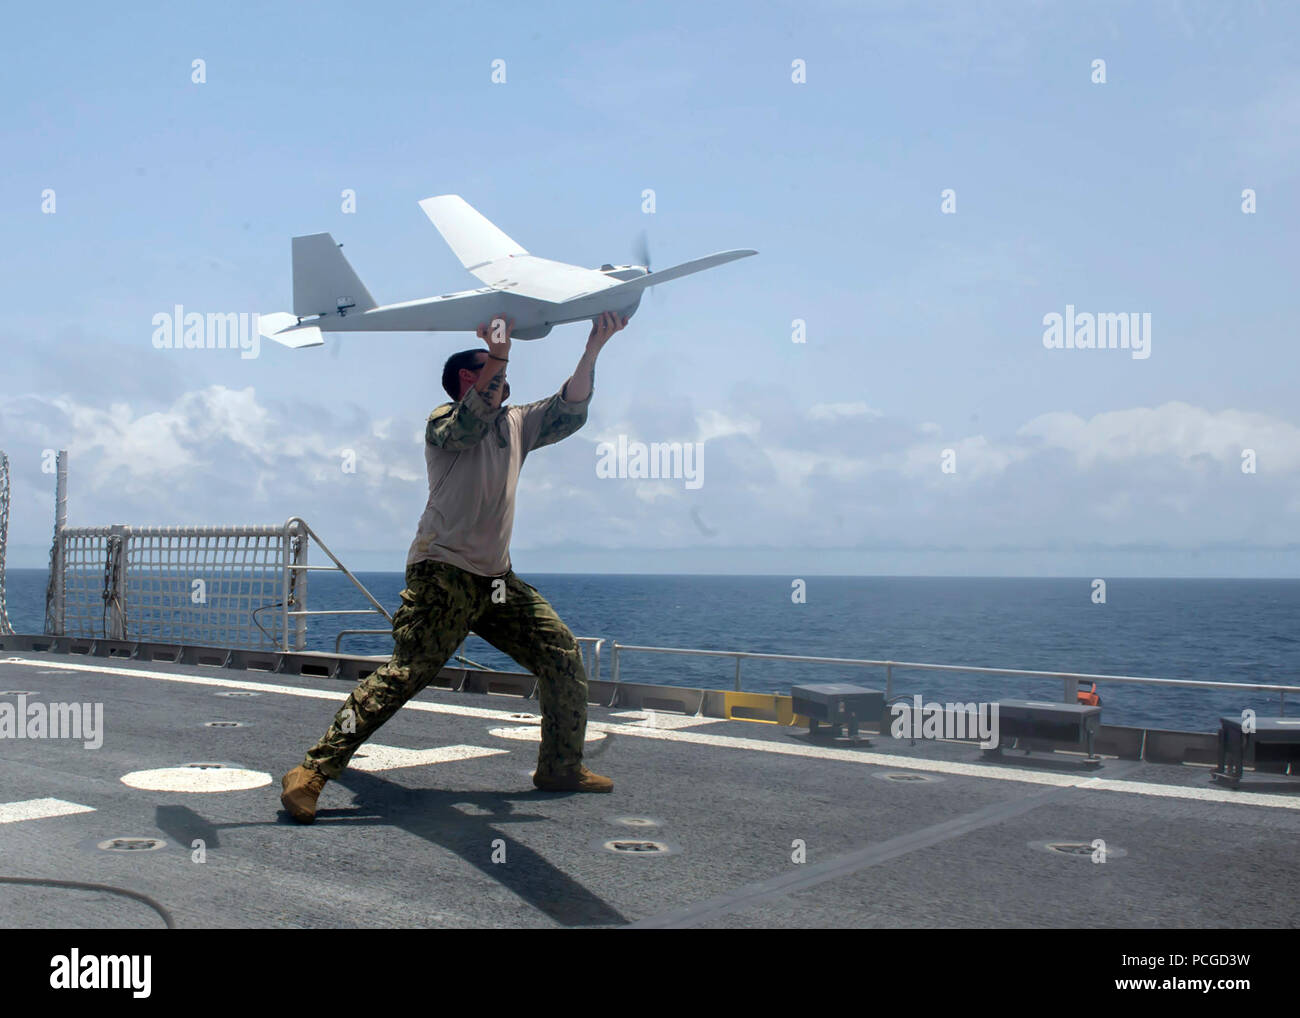 OF GUINEA (March 27, 2014) Fire Controlman 2nd Class Dustin Gower, assigned to the PUMA unmanned aerial vehicle (UAV) detachment aboard the Military Sealift Command joint high-speed vessel USNS Spearhead (JHSV 1), throws a UAV during flight operations as part of a U.S. and Ghana navy combined maritime law enforcement operation under the African Maritime Law Enforcement Partnership program. Stock Photo